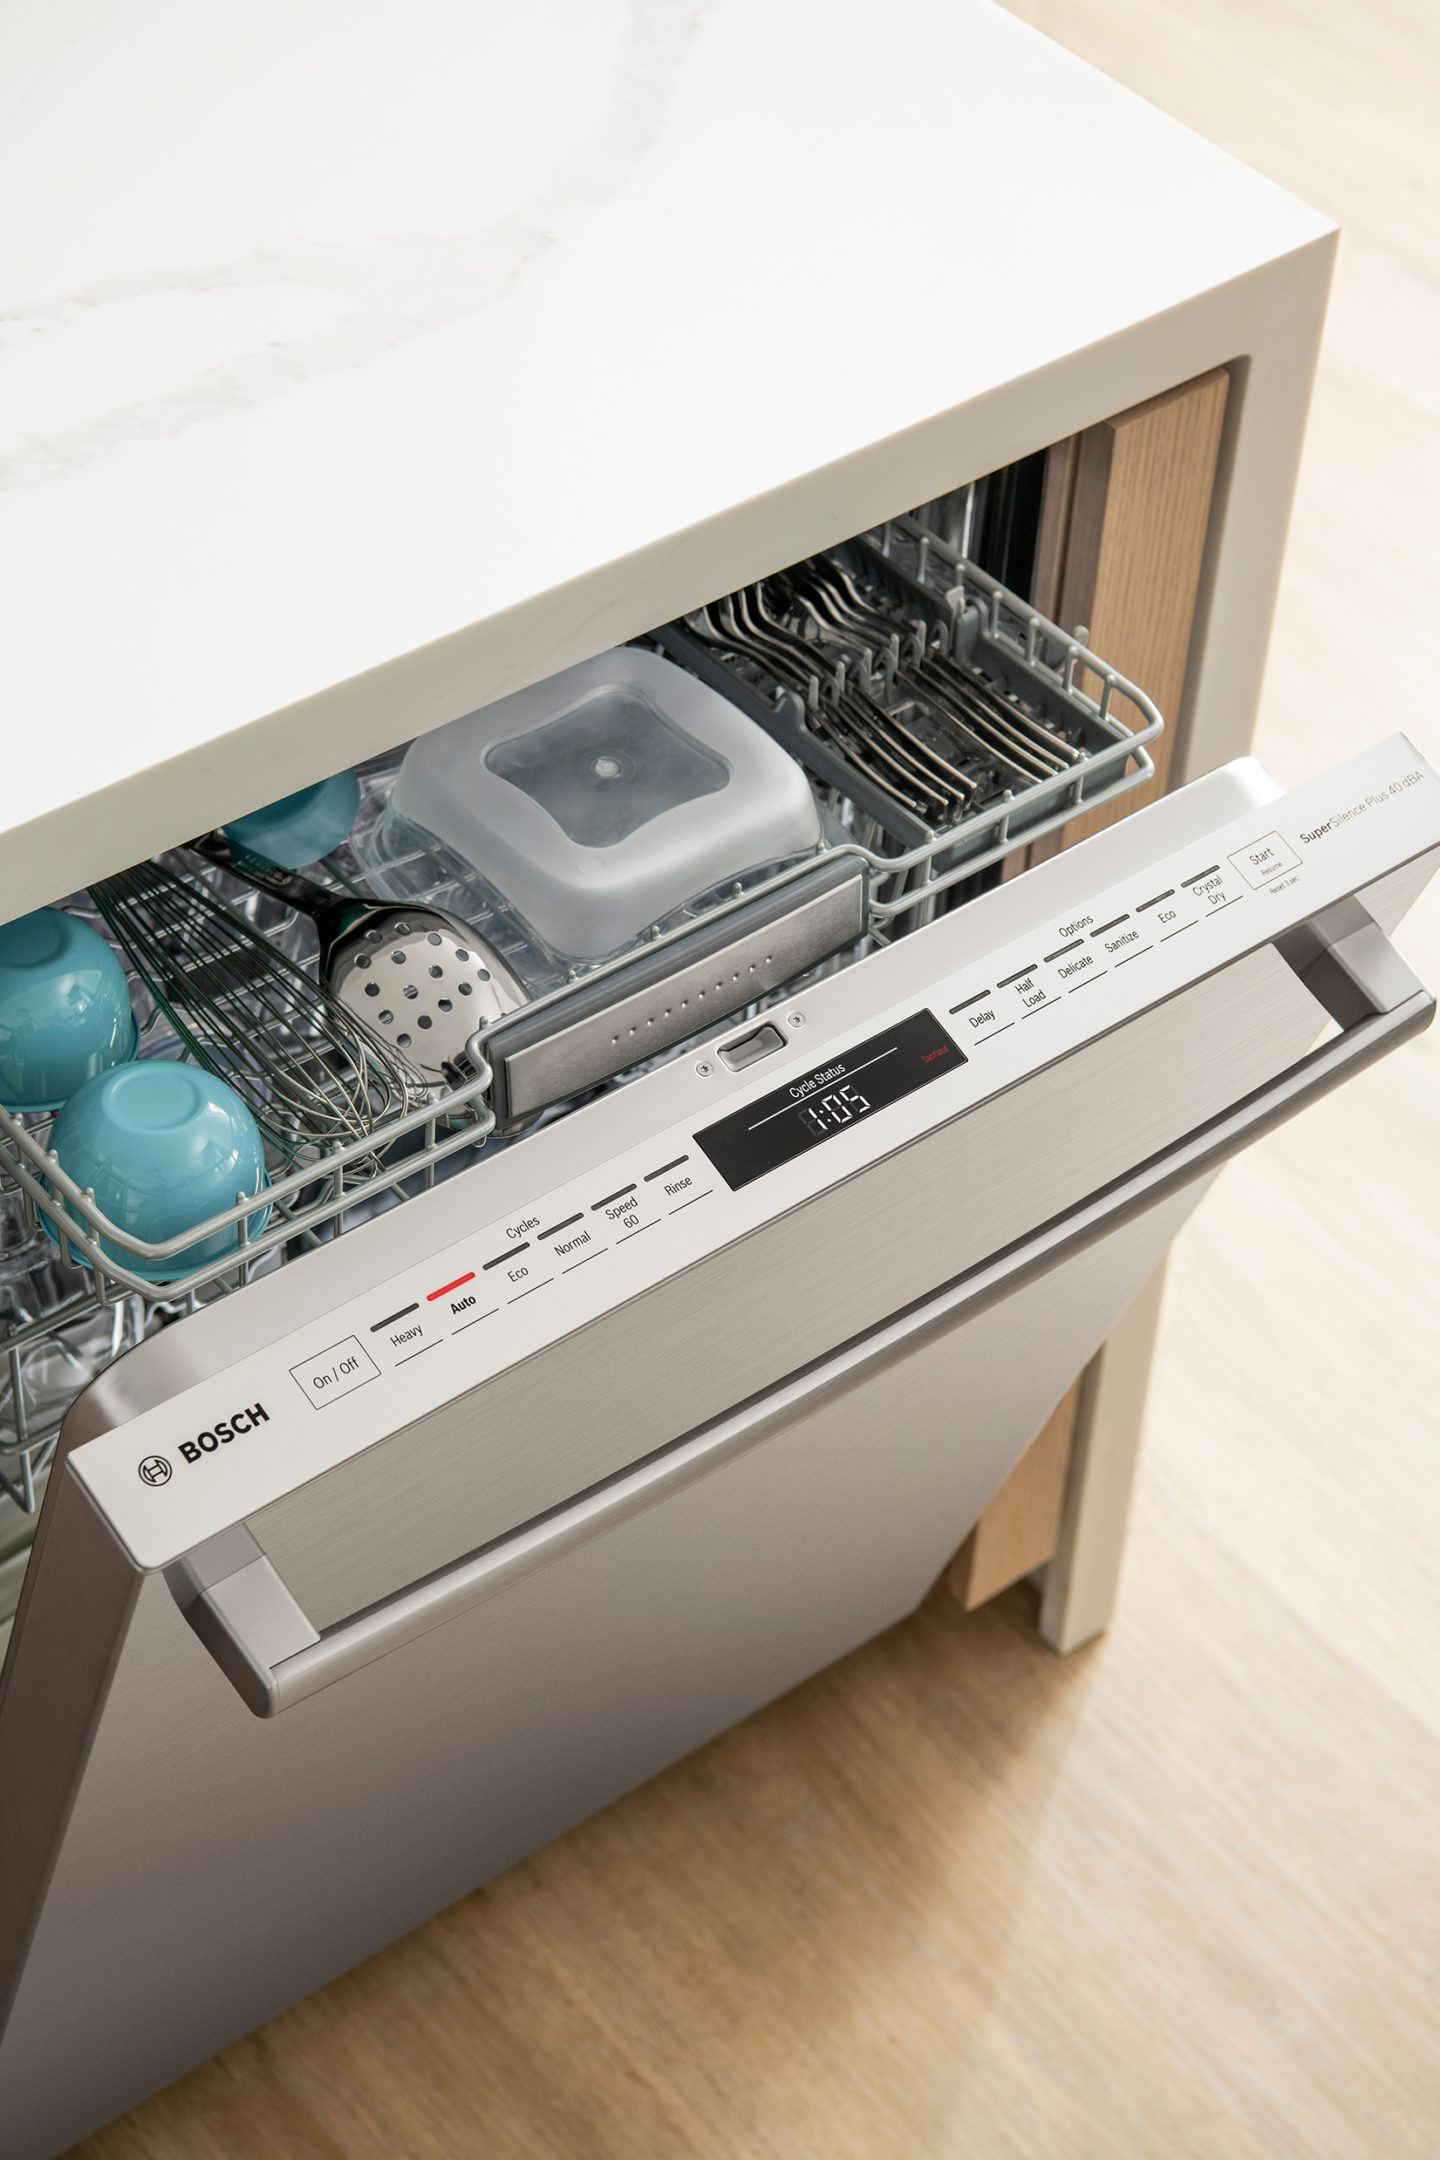 Make Life Easier with Bosch 800 Series Dishwashers with CrystalDry